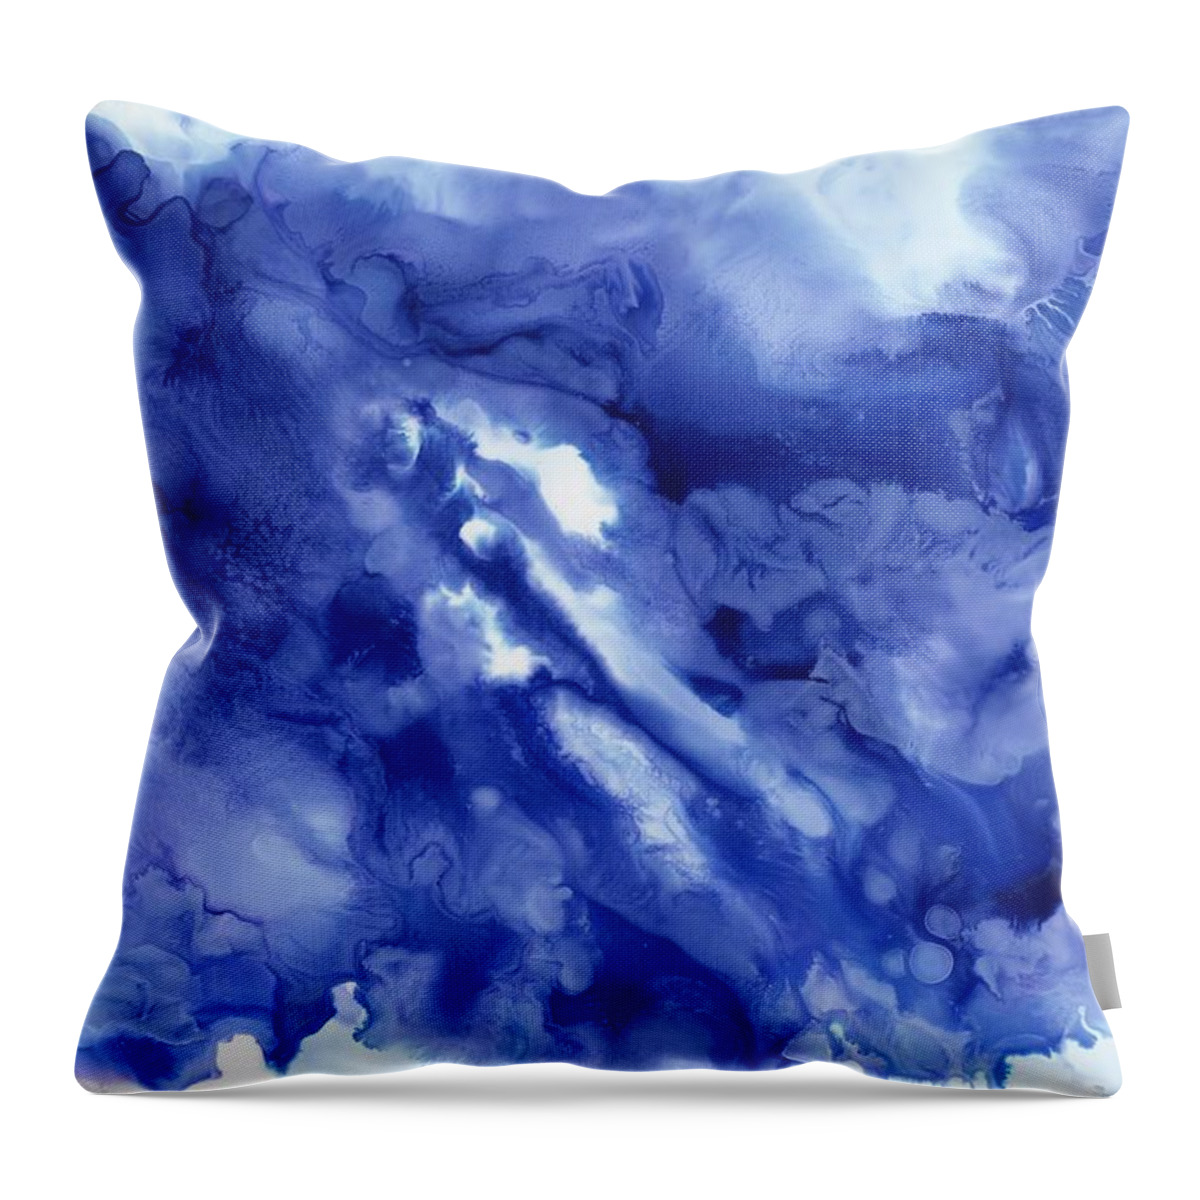 Blue Throw Pillow featuring the painting Blue Cloud by Christy Sawyer